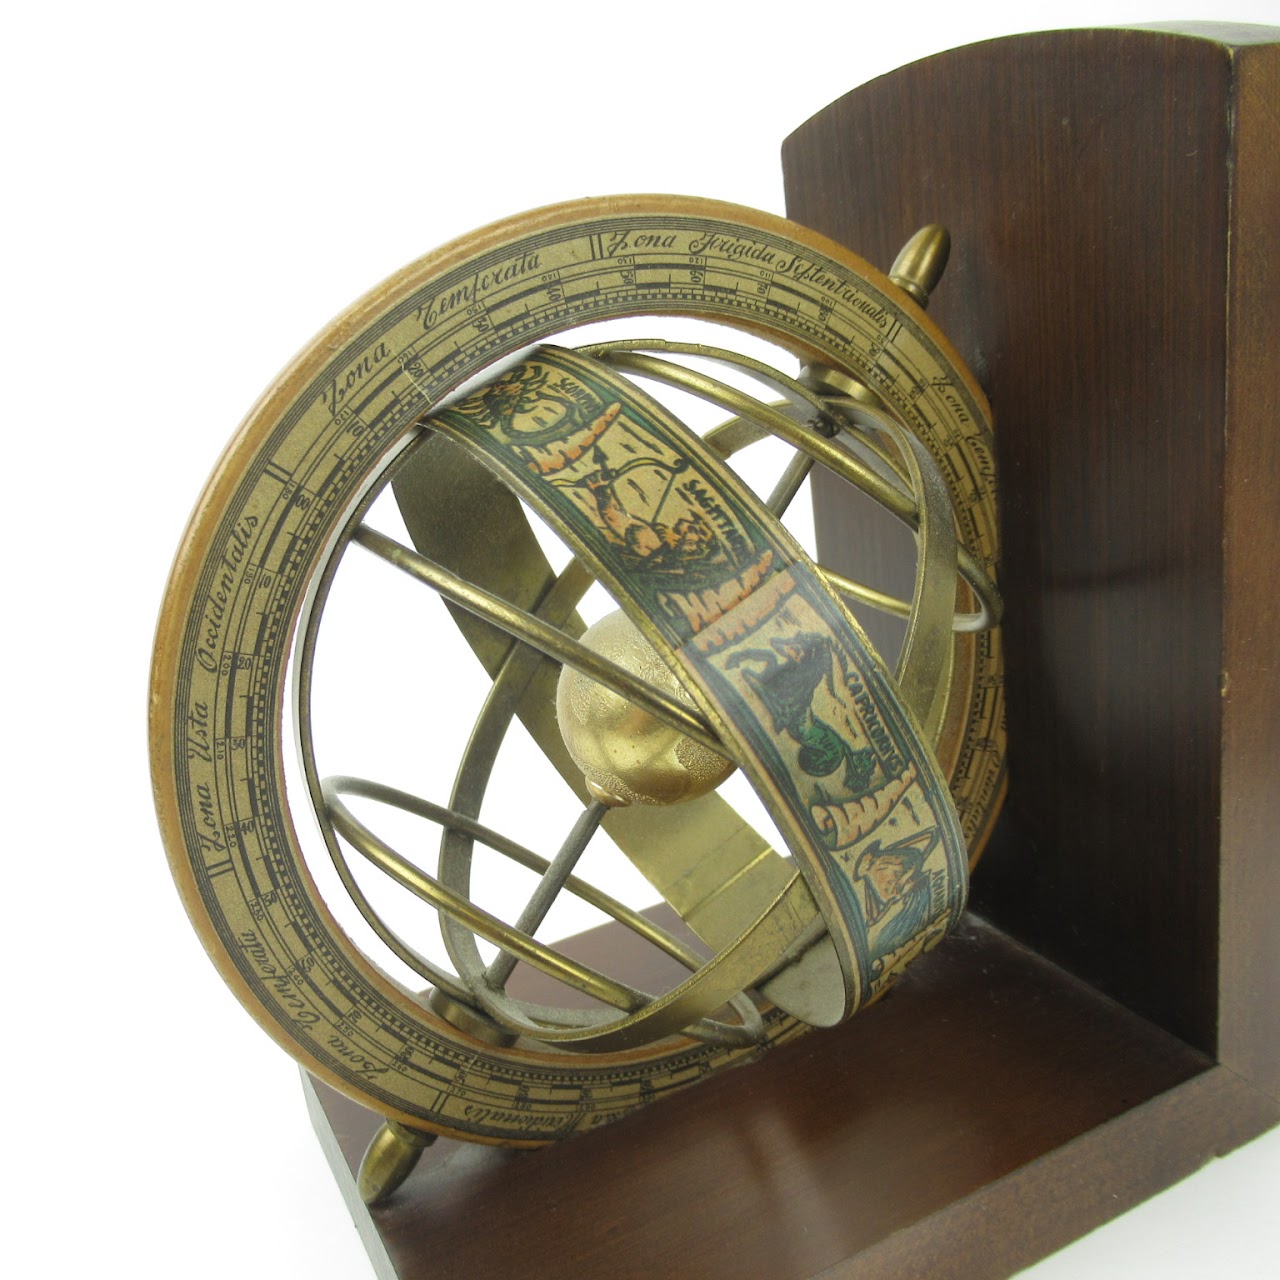 Midcentury Spinning Globe Bookends Pair